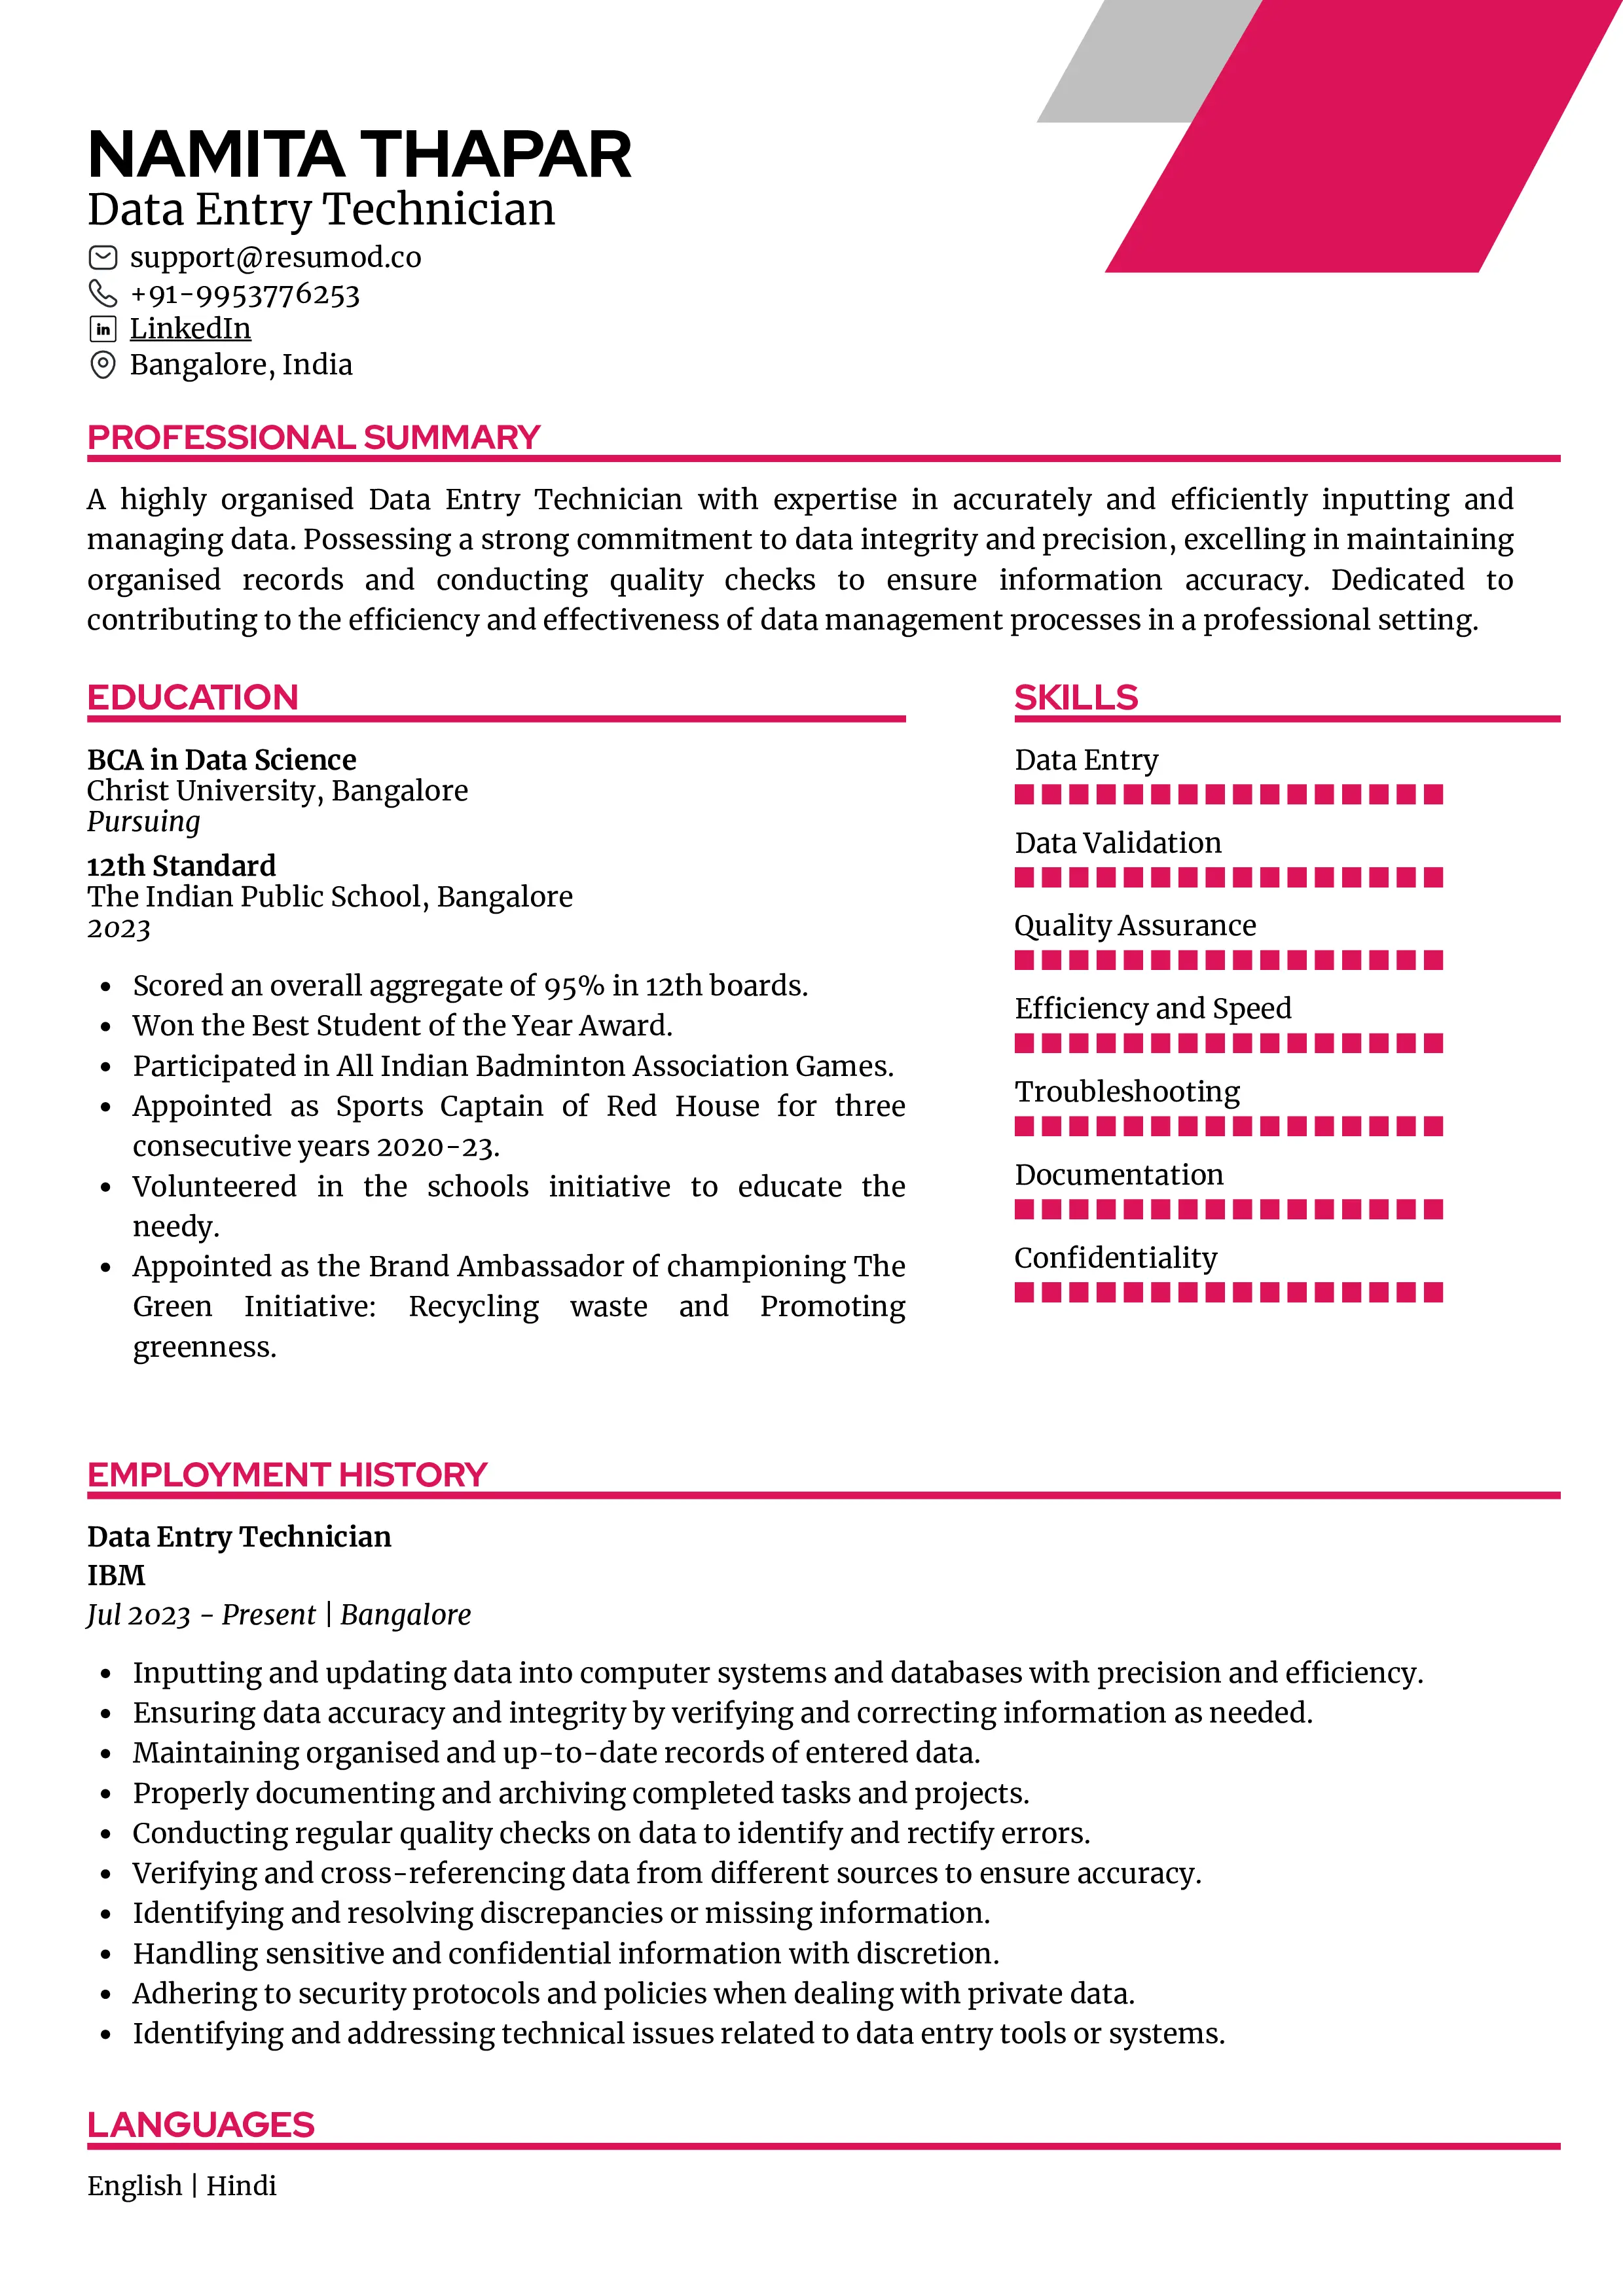 Sample Resume of Data Entry Technician | Free Resume Templates & Samples on Resumod.co